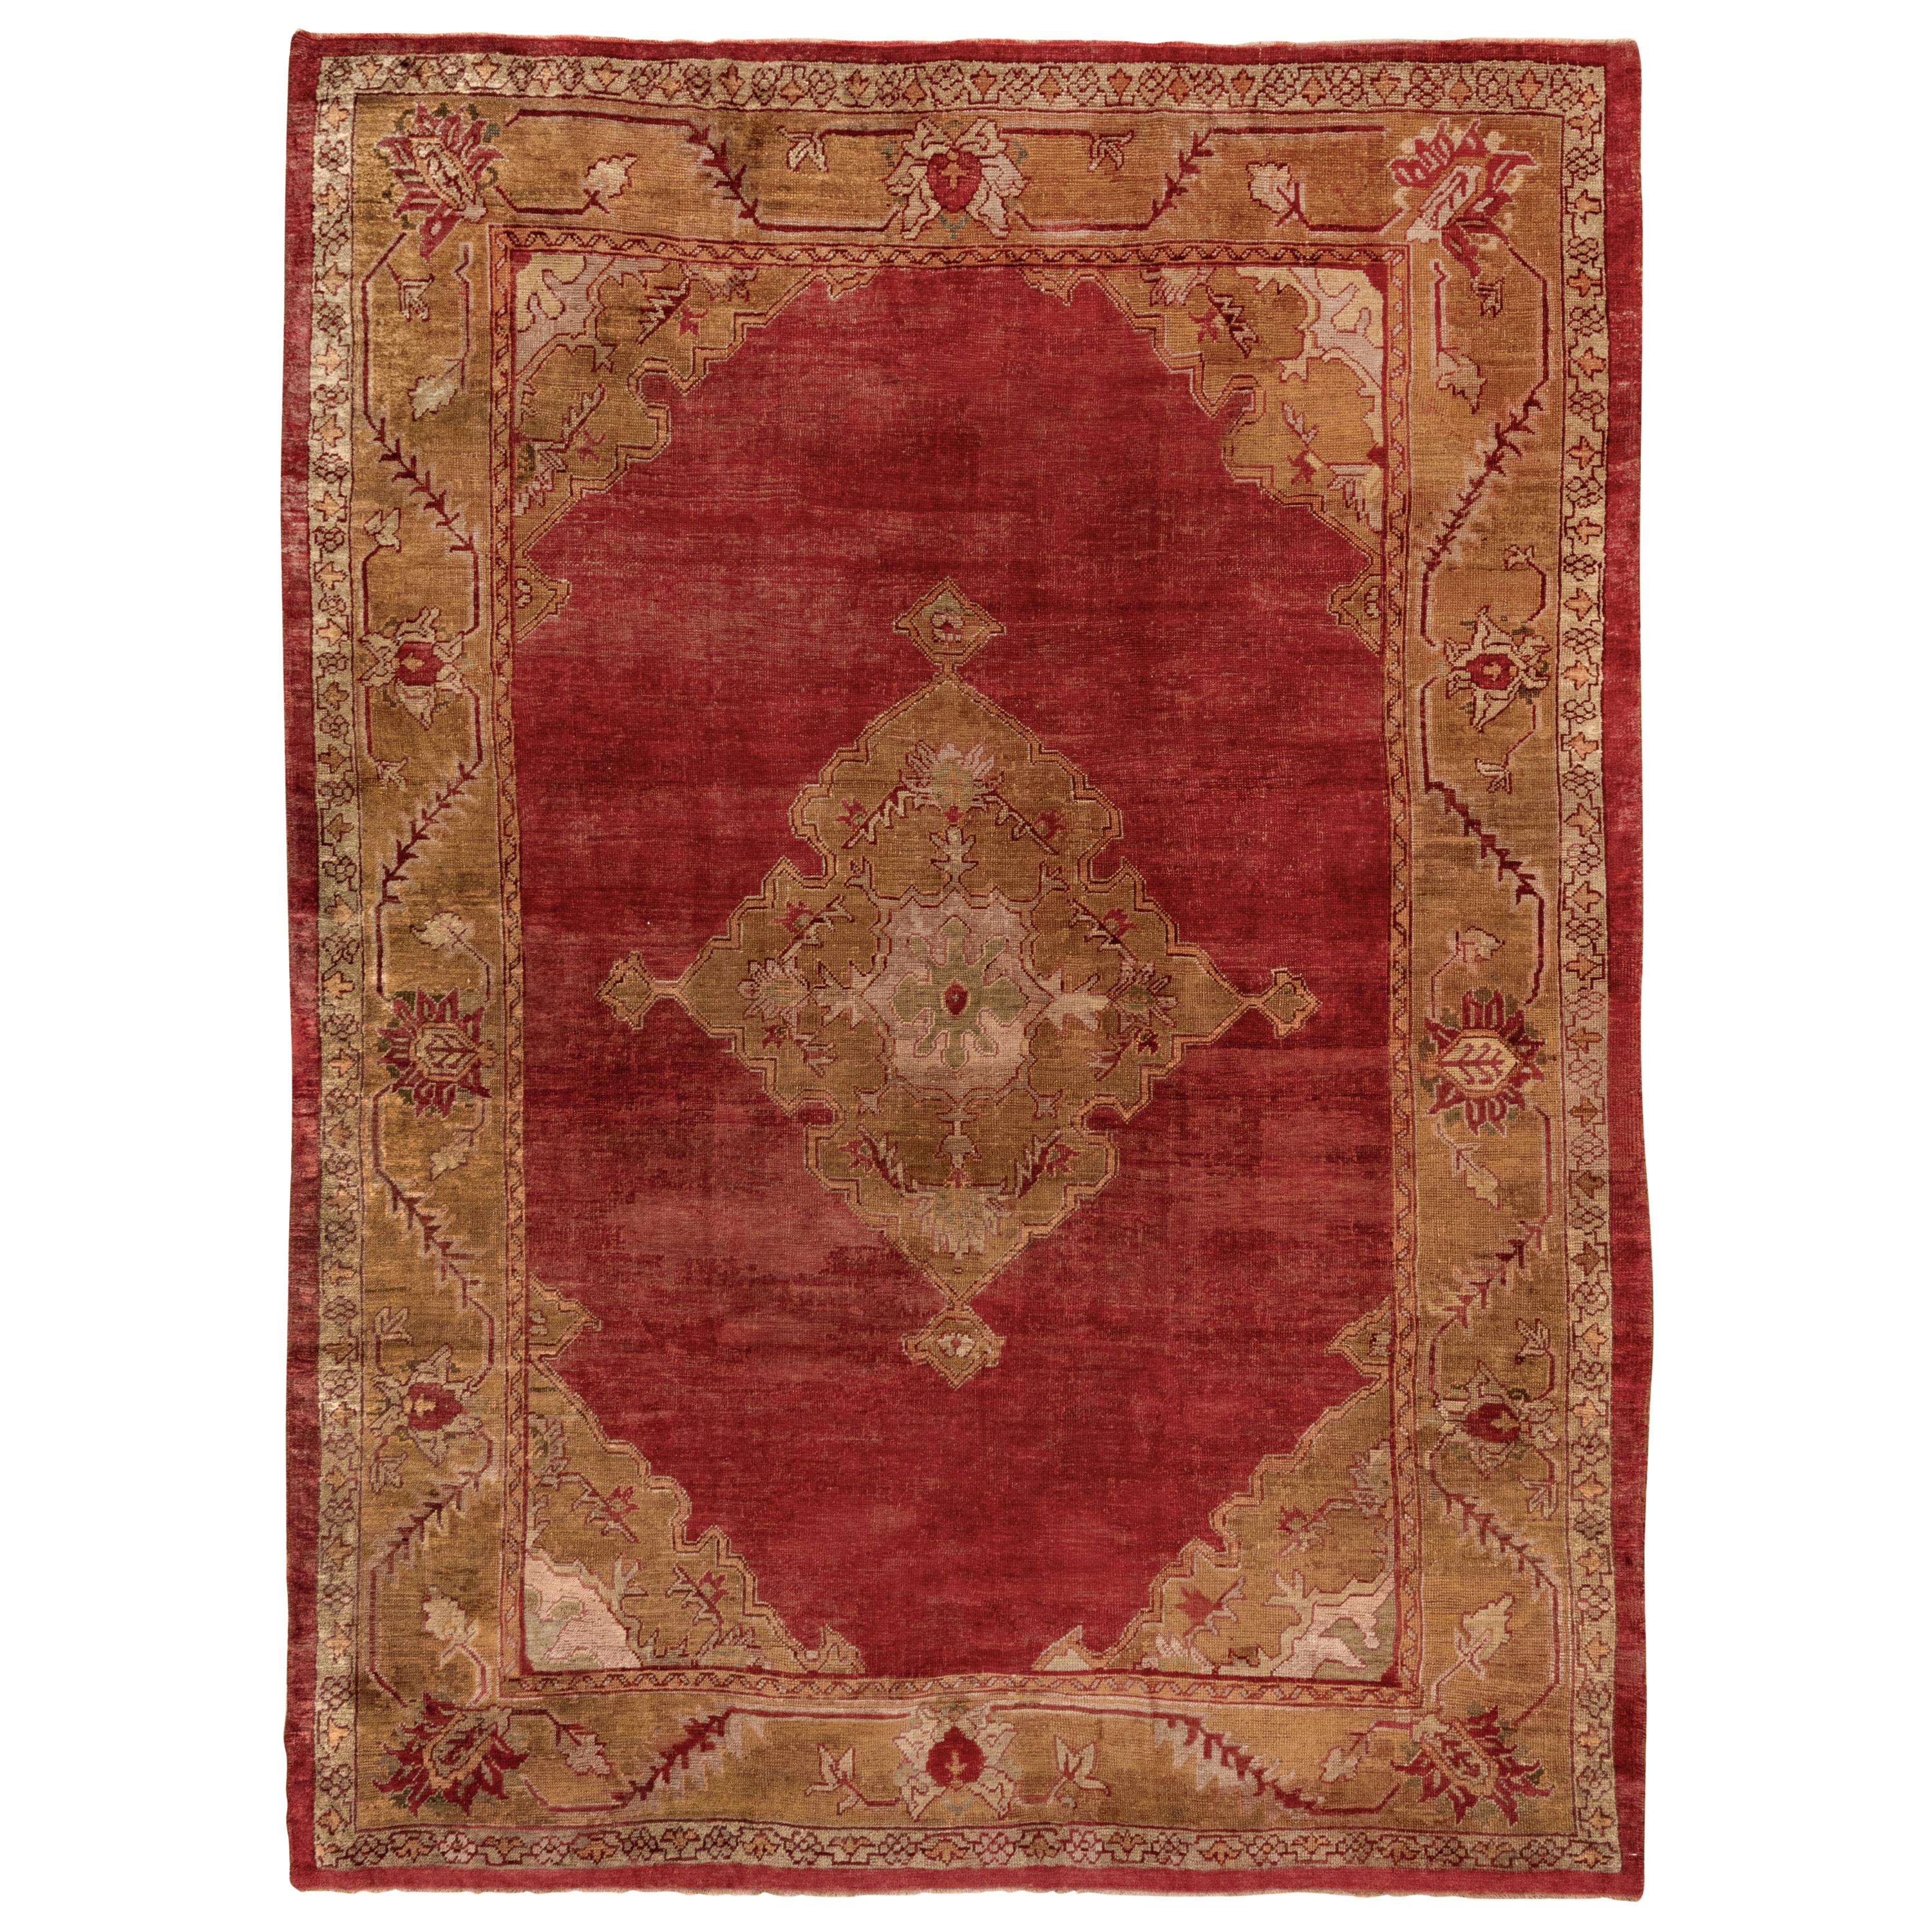 Antique Turkish Oushak Rug, Red Field and Gold Borders, Center Medallion